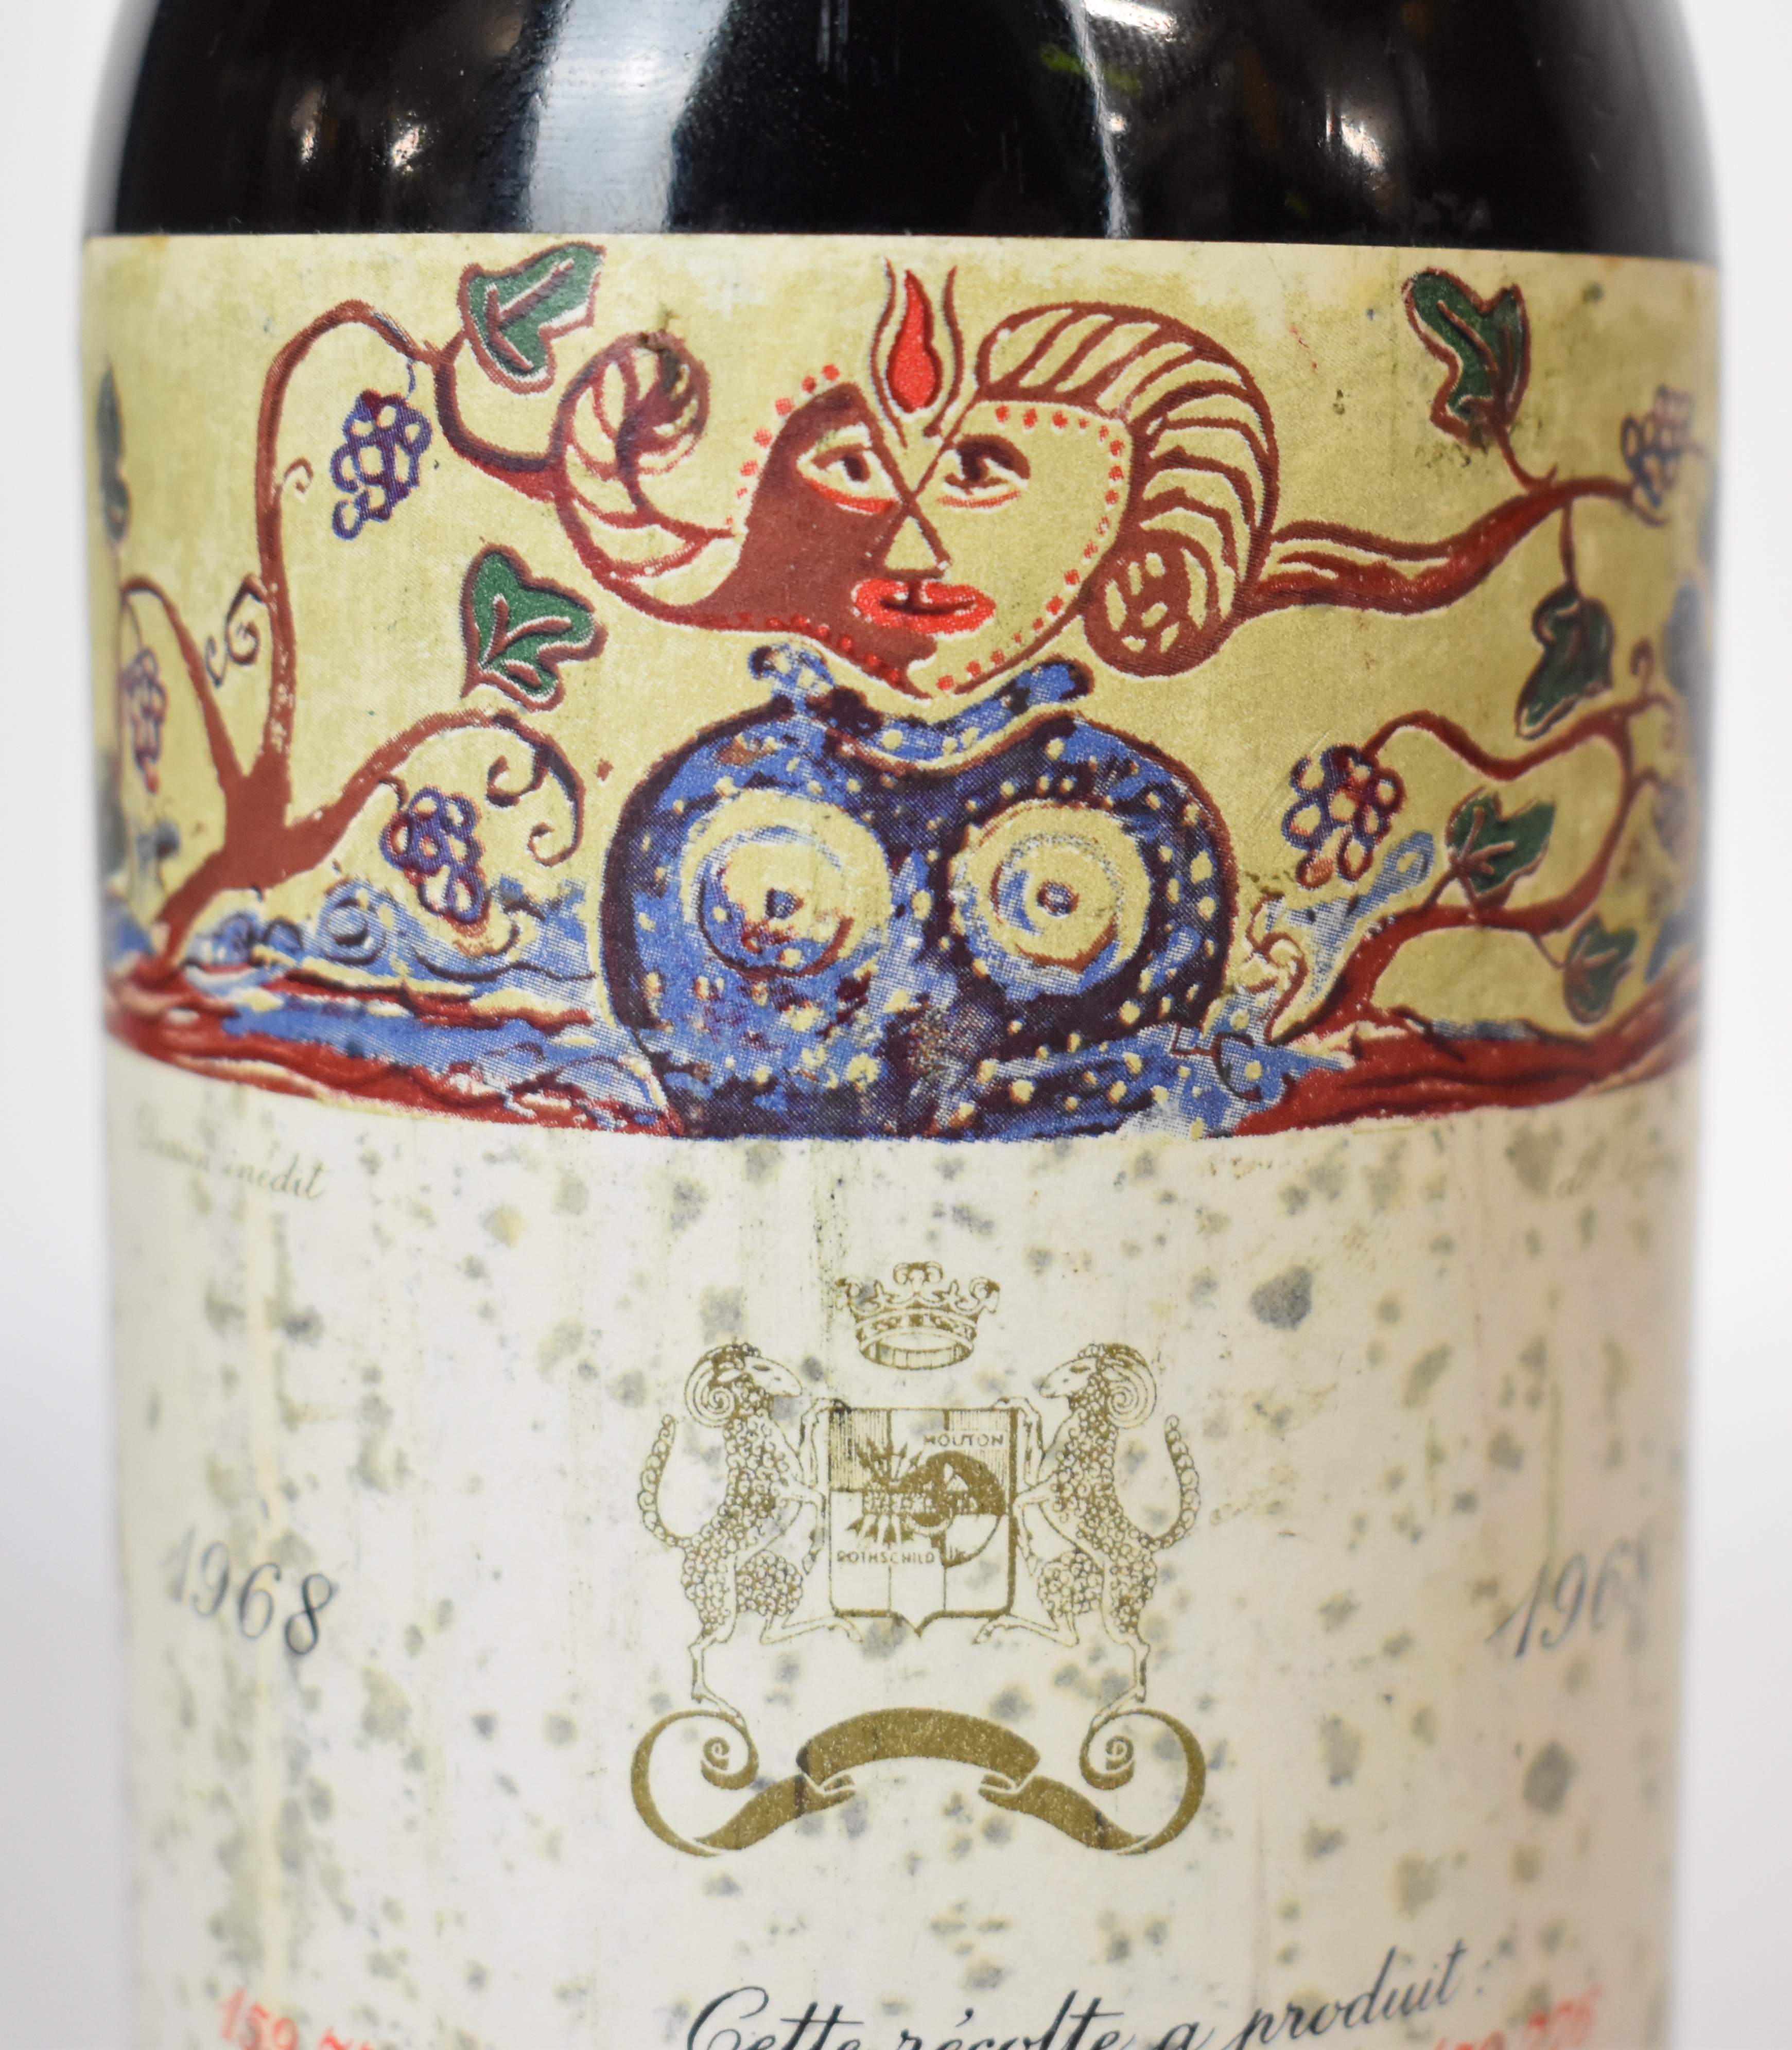 Chateau Mouton Rothschild red wine, 1968, bottle number 28753, 75cl. PLEASE NOTE ALL ALCOHOL & - Image 6 of 6